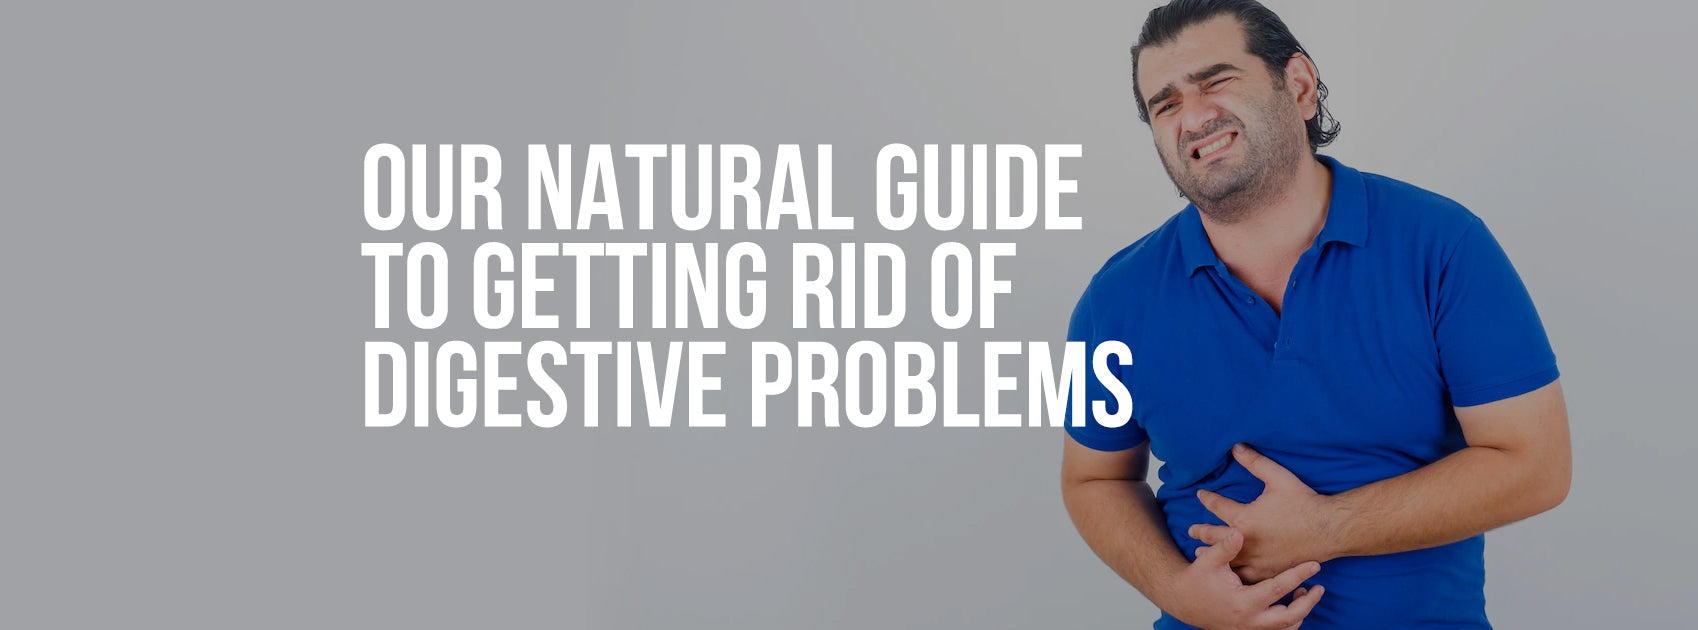 Our Natural Guide to Getting Rid of Digestive Problems!